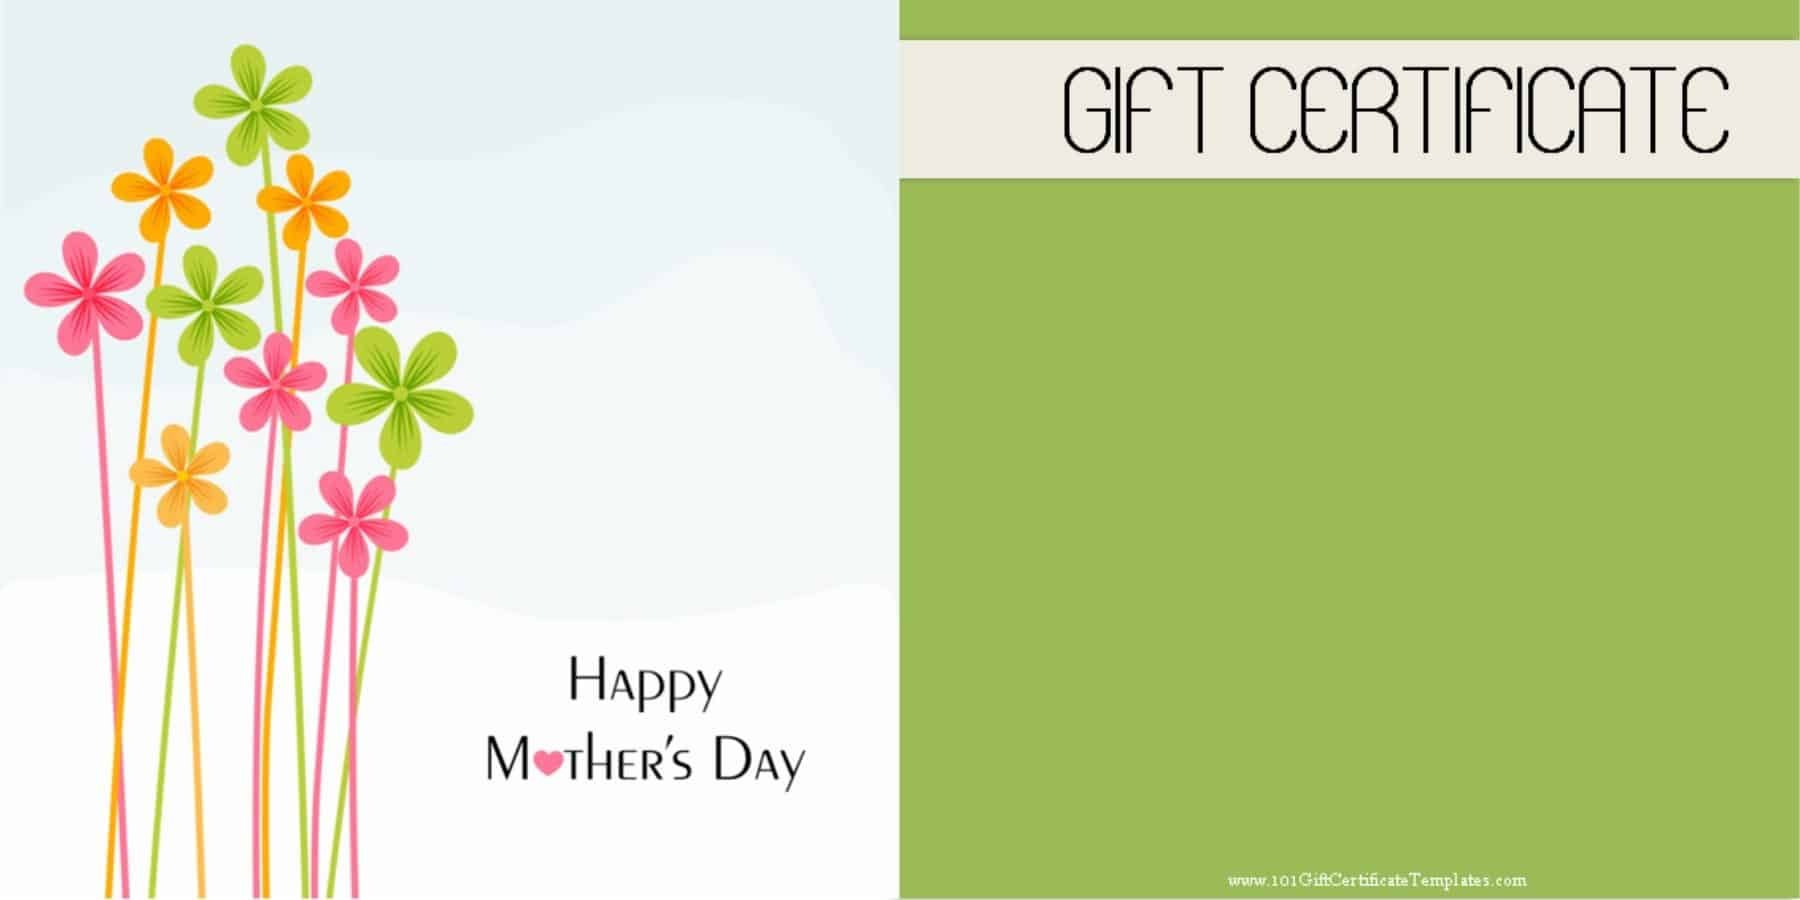 Mother's Day Gift Certificate Templates in Spa Day Gift Certificate Template